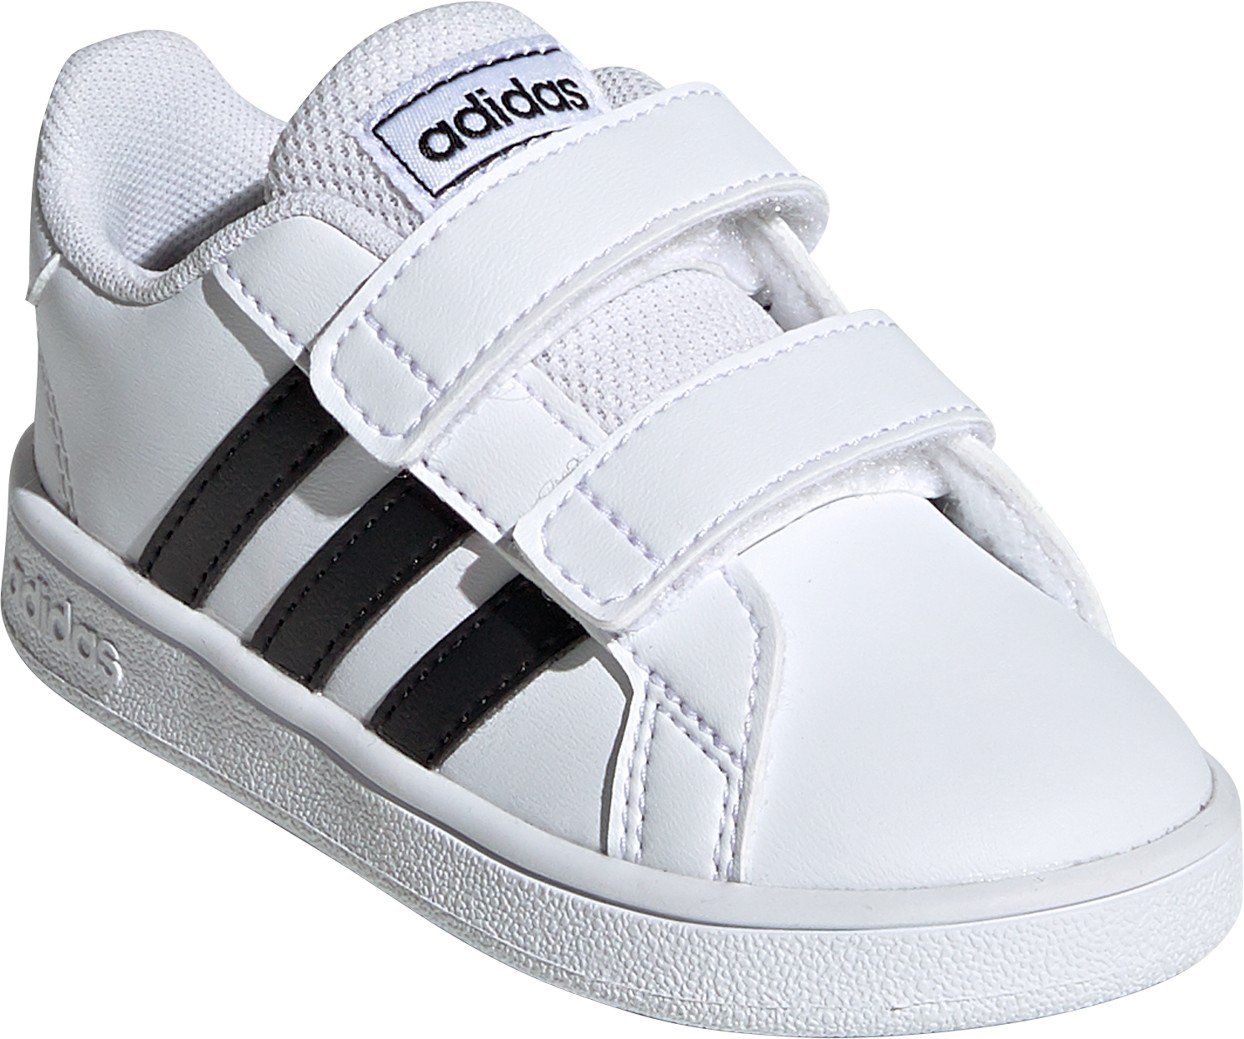 adidas youth girl shoes